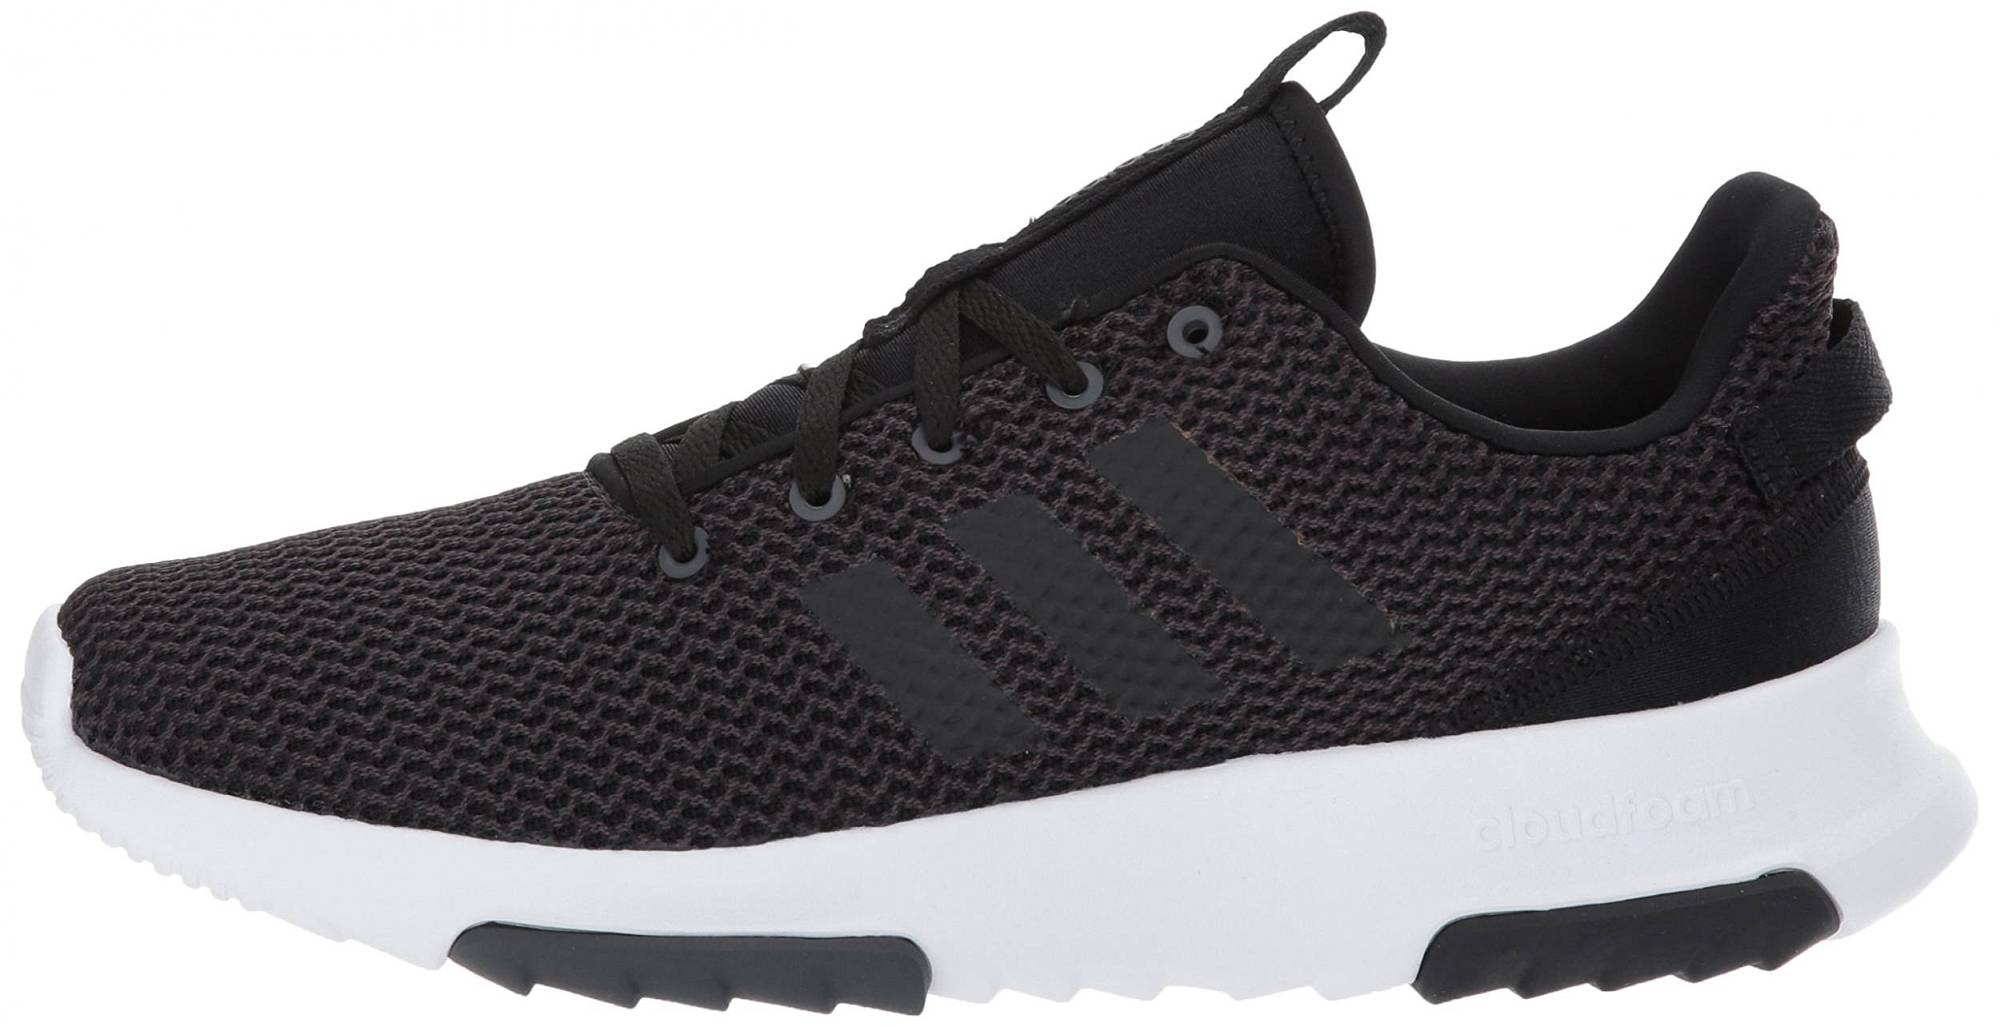 Adidas Cloudfoam Racer TR – Shoes Reviews & Reasons To Buy